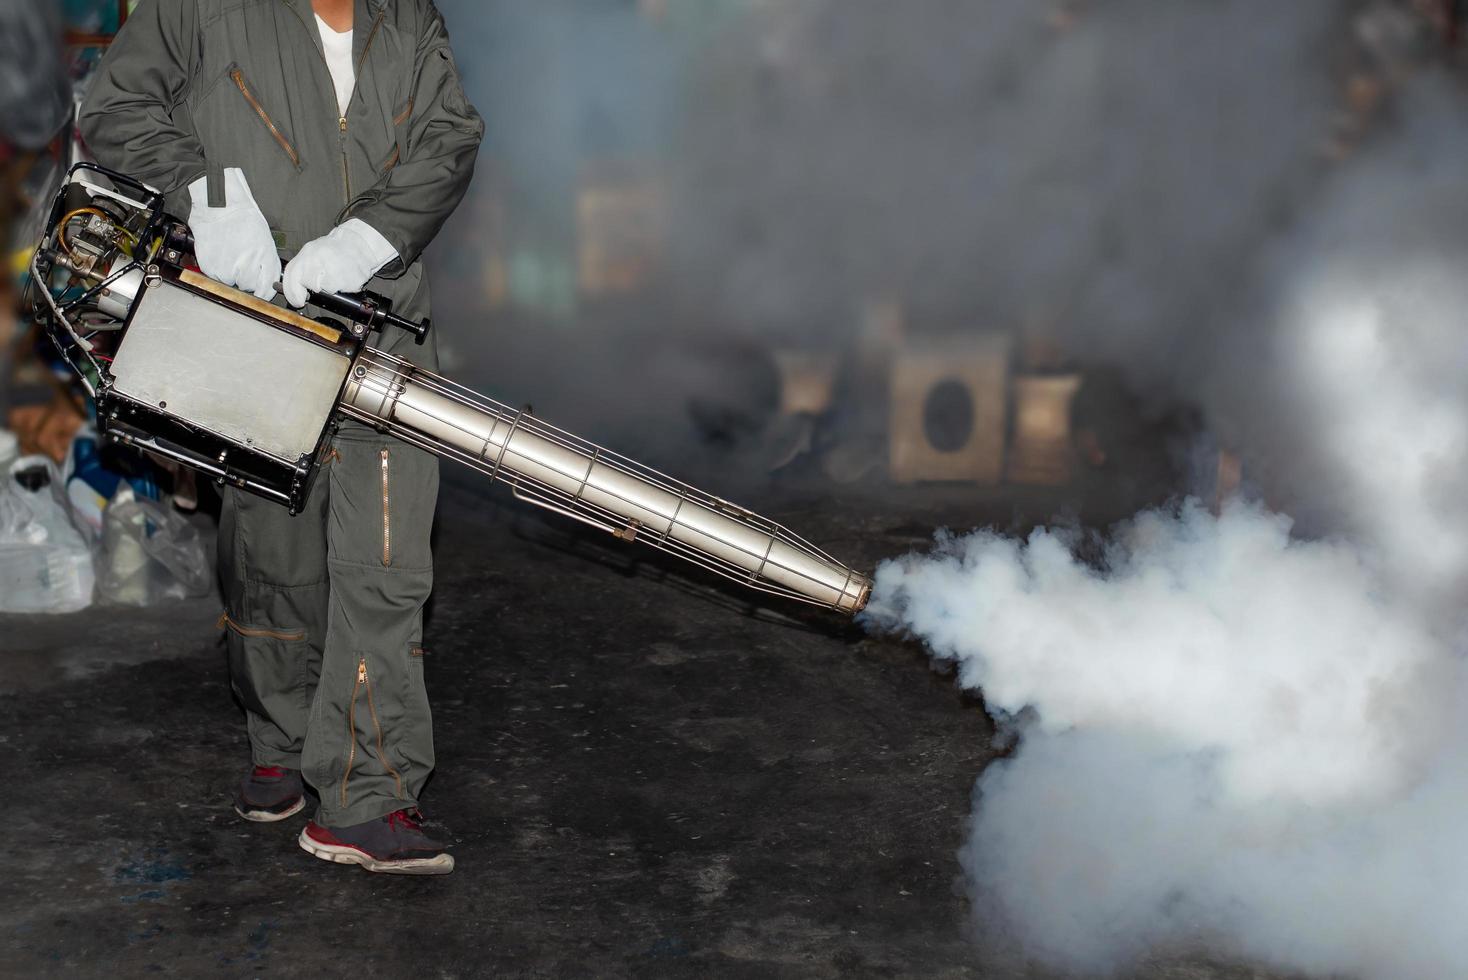 Fogging to eliminate mosquito for preventing spread dengue fever and zika virus photo